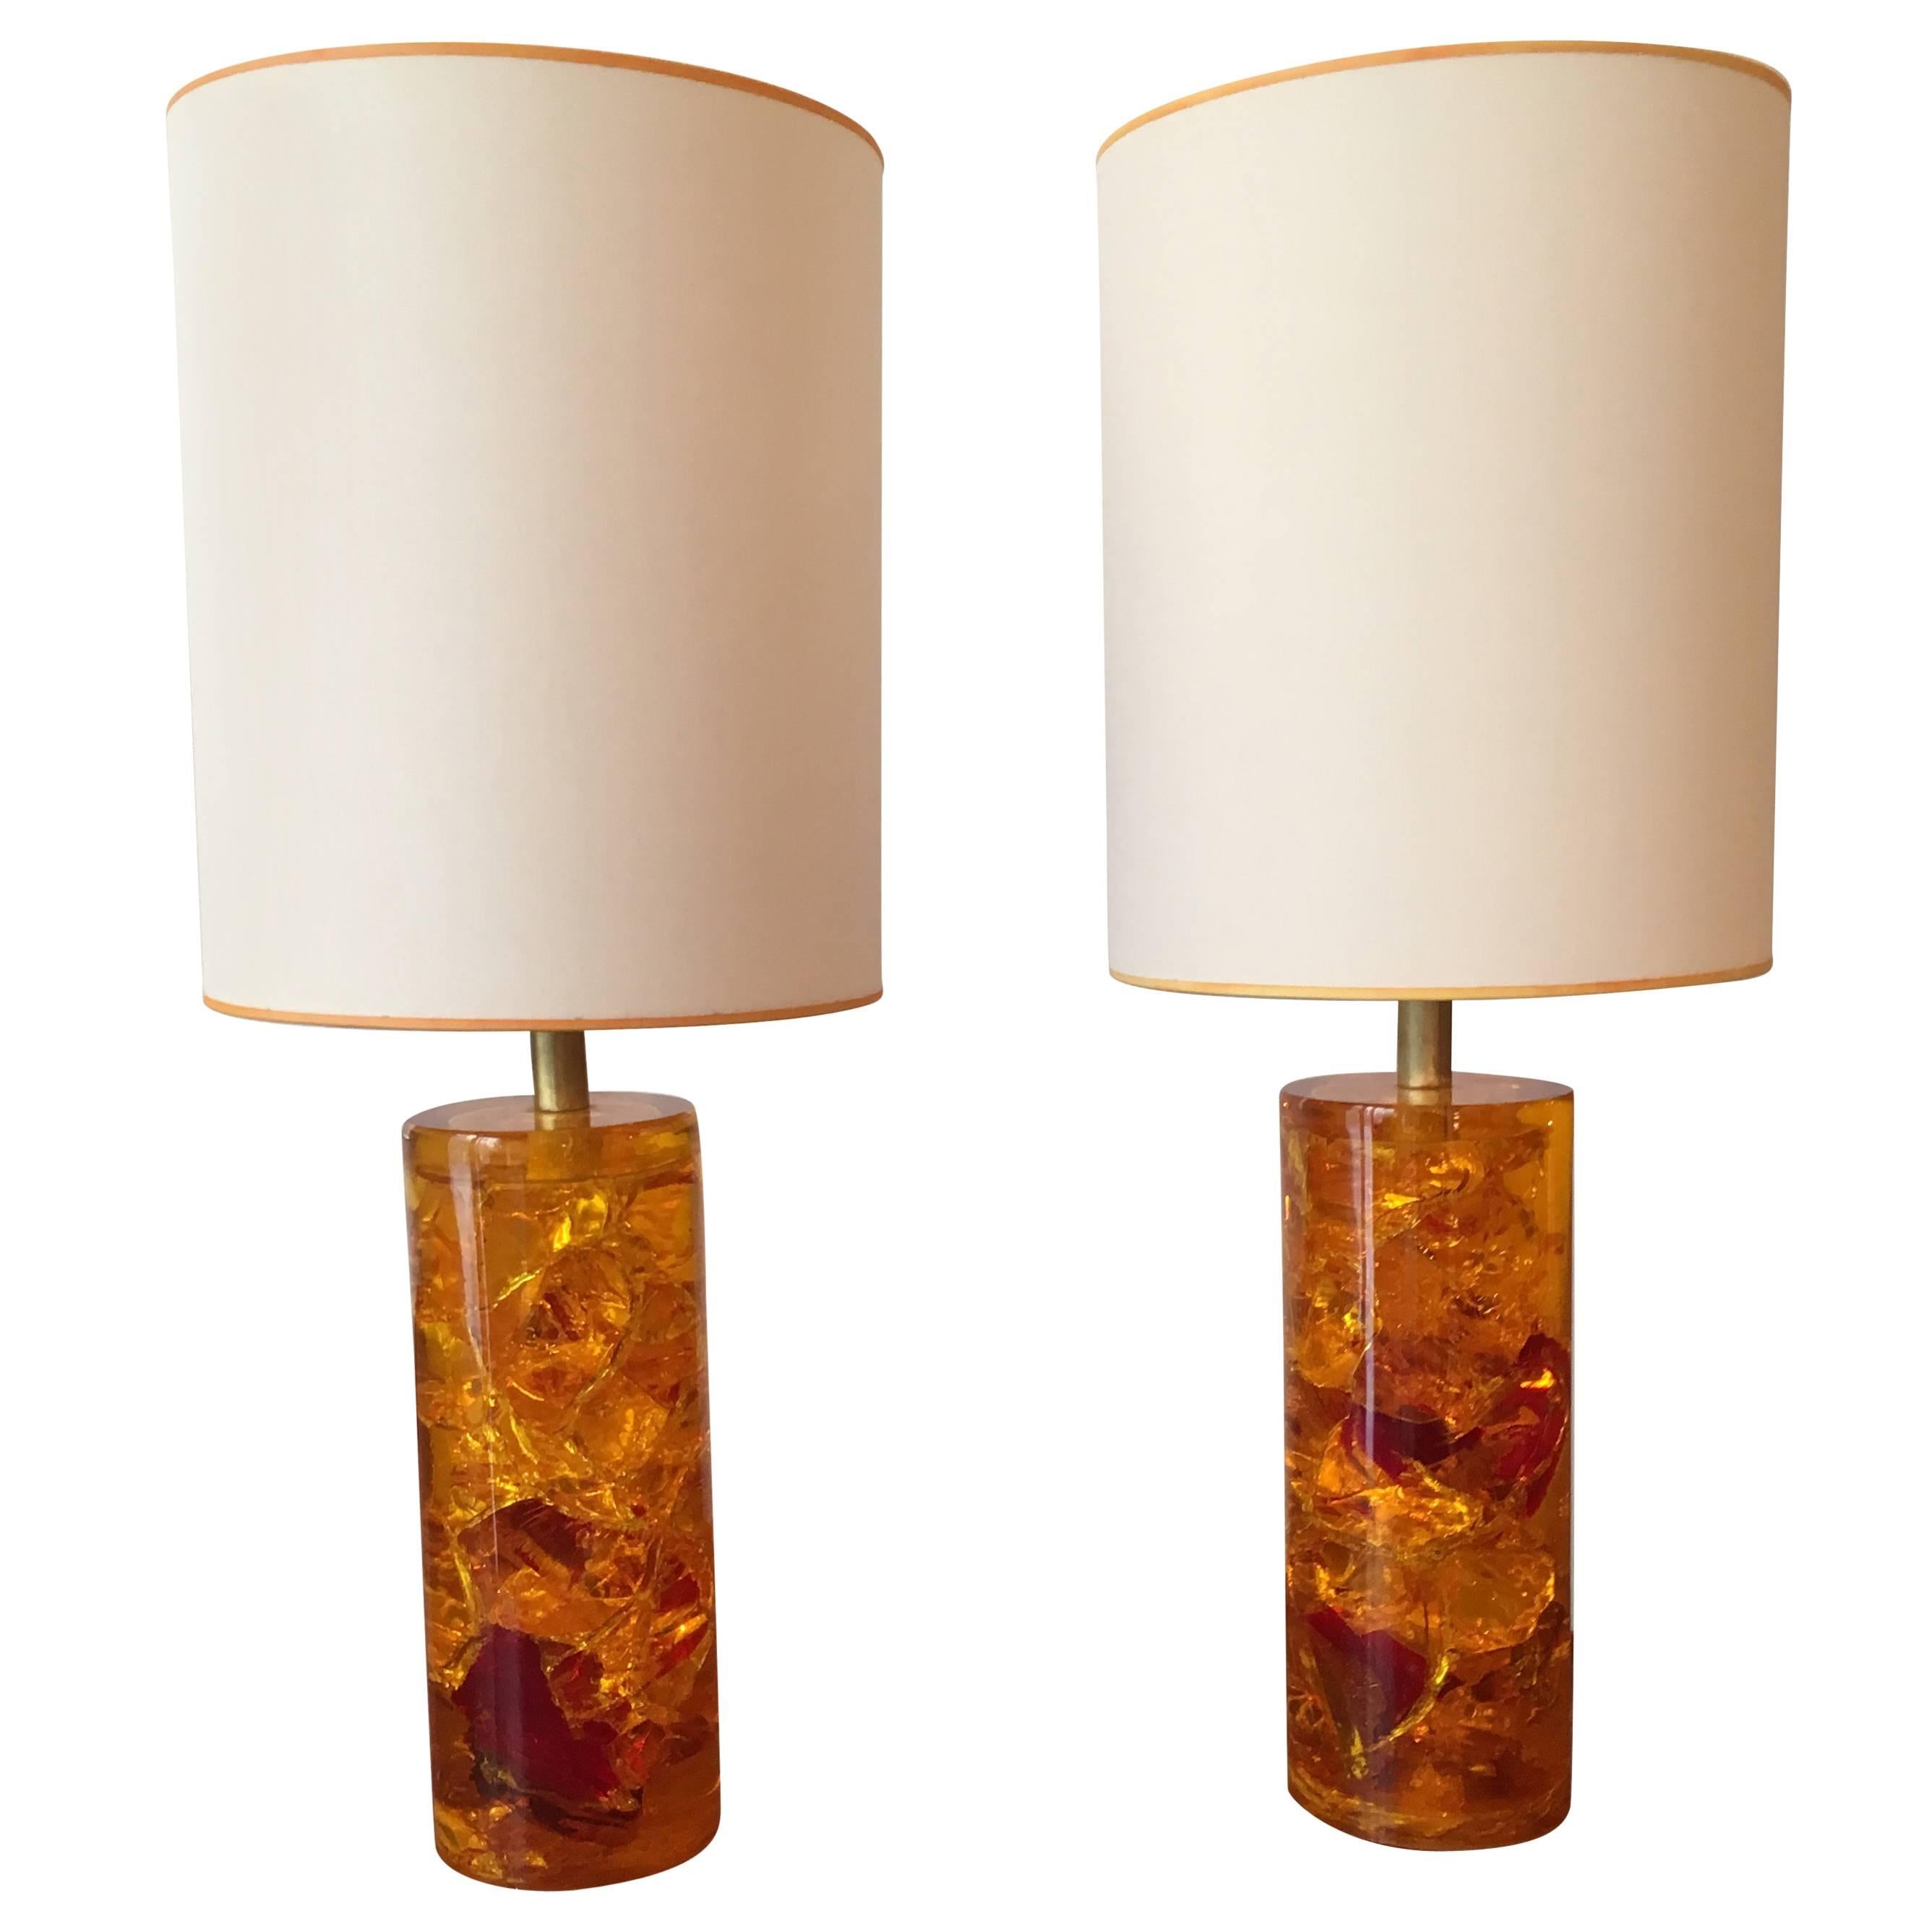 Pair of Fractal Resin Table Lamps, France, circa 1970 For Sale